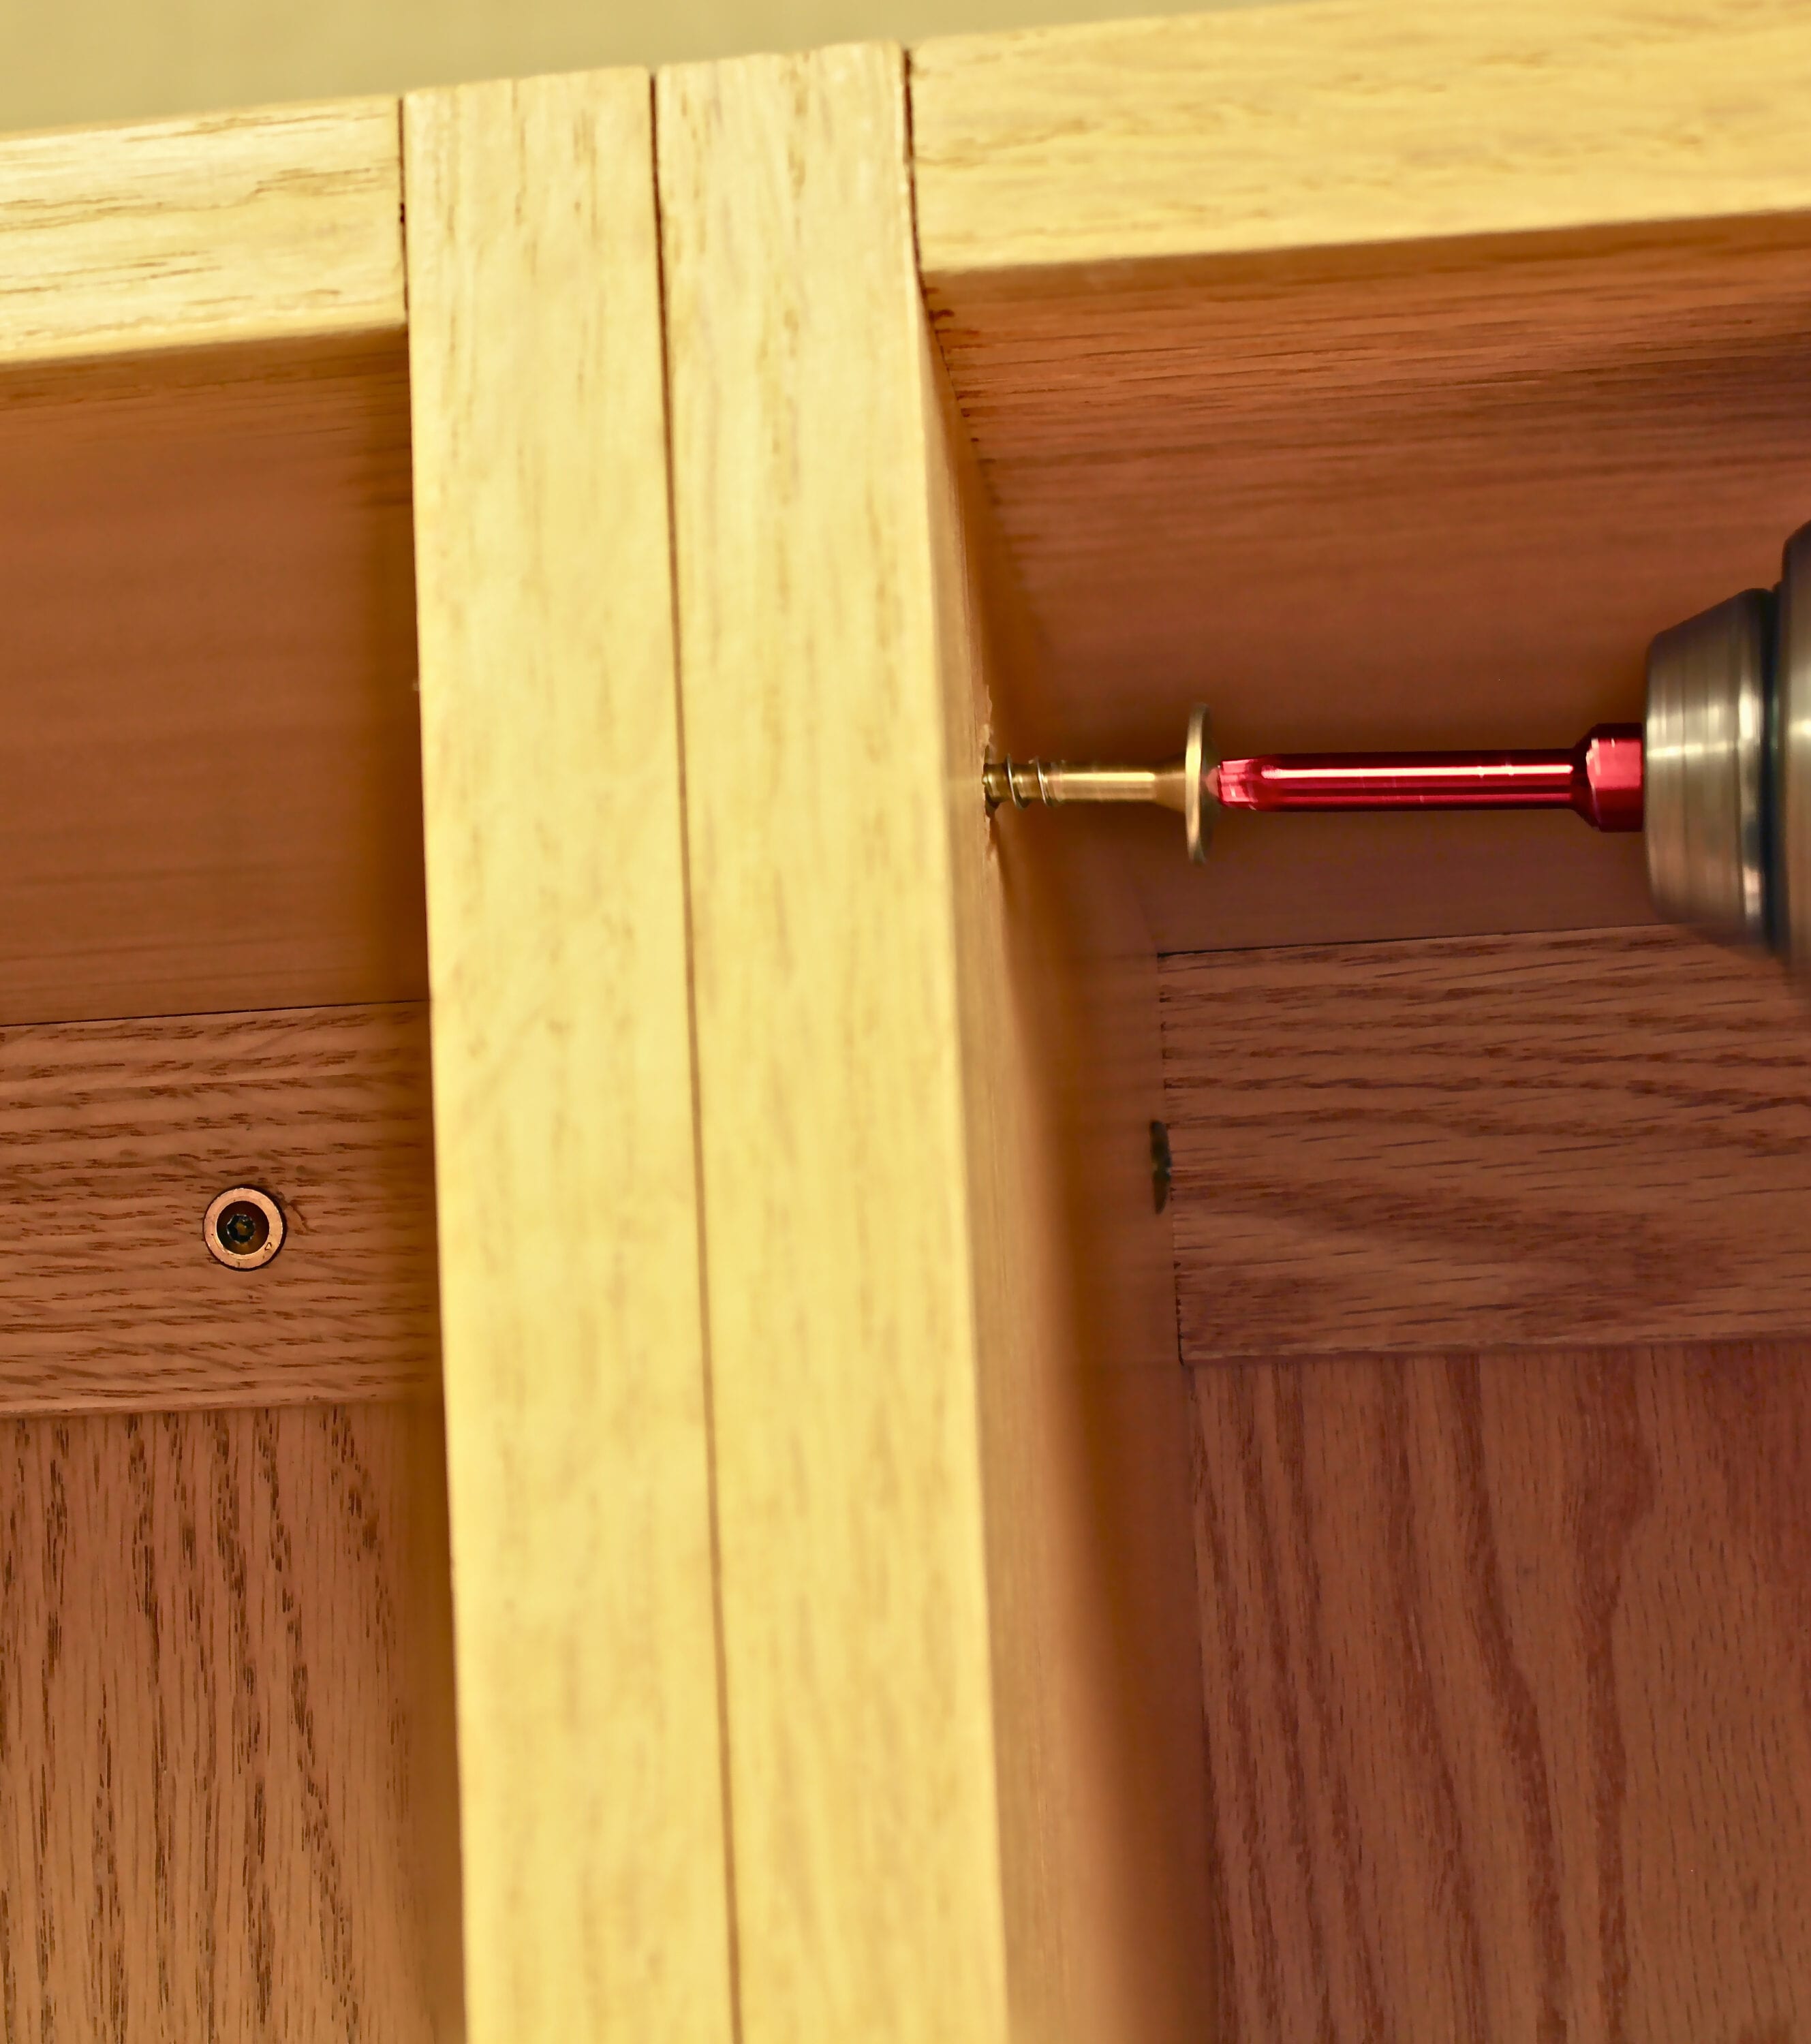 only 8 screws were used to perfect this pantry door lock, I pre-drilled the  wooden blocks I made then pre-drilled the doo…